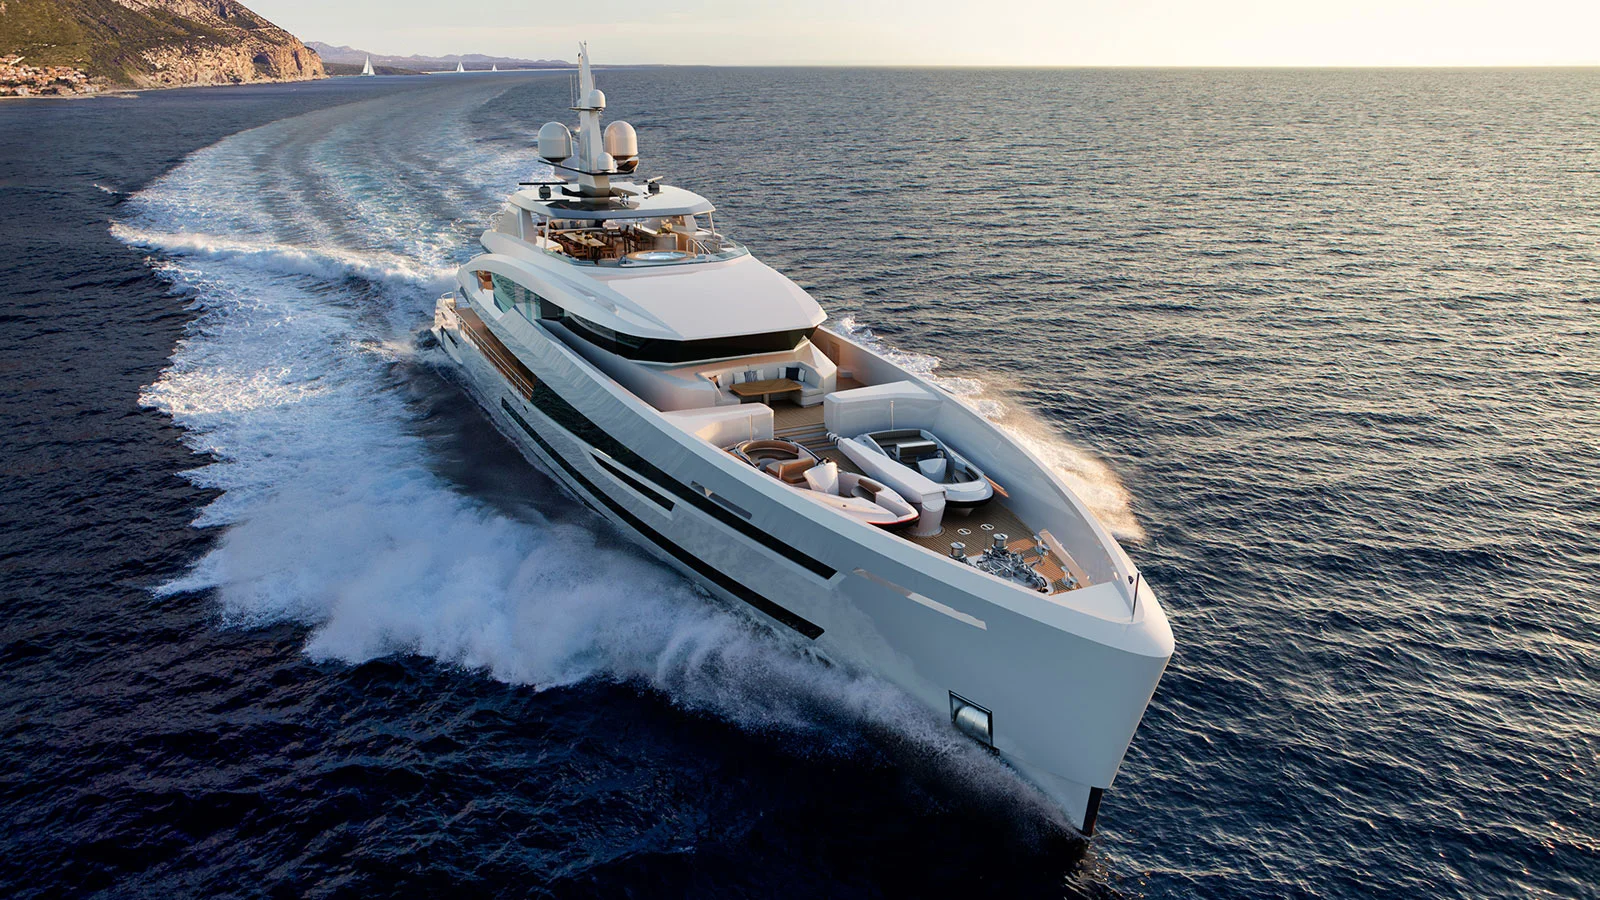 Project Akira project is the first superyacht of the 57m Aluminum FDHF series